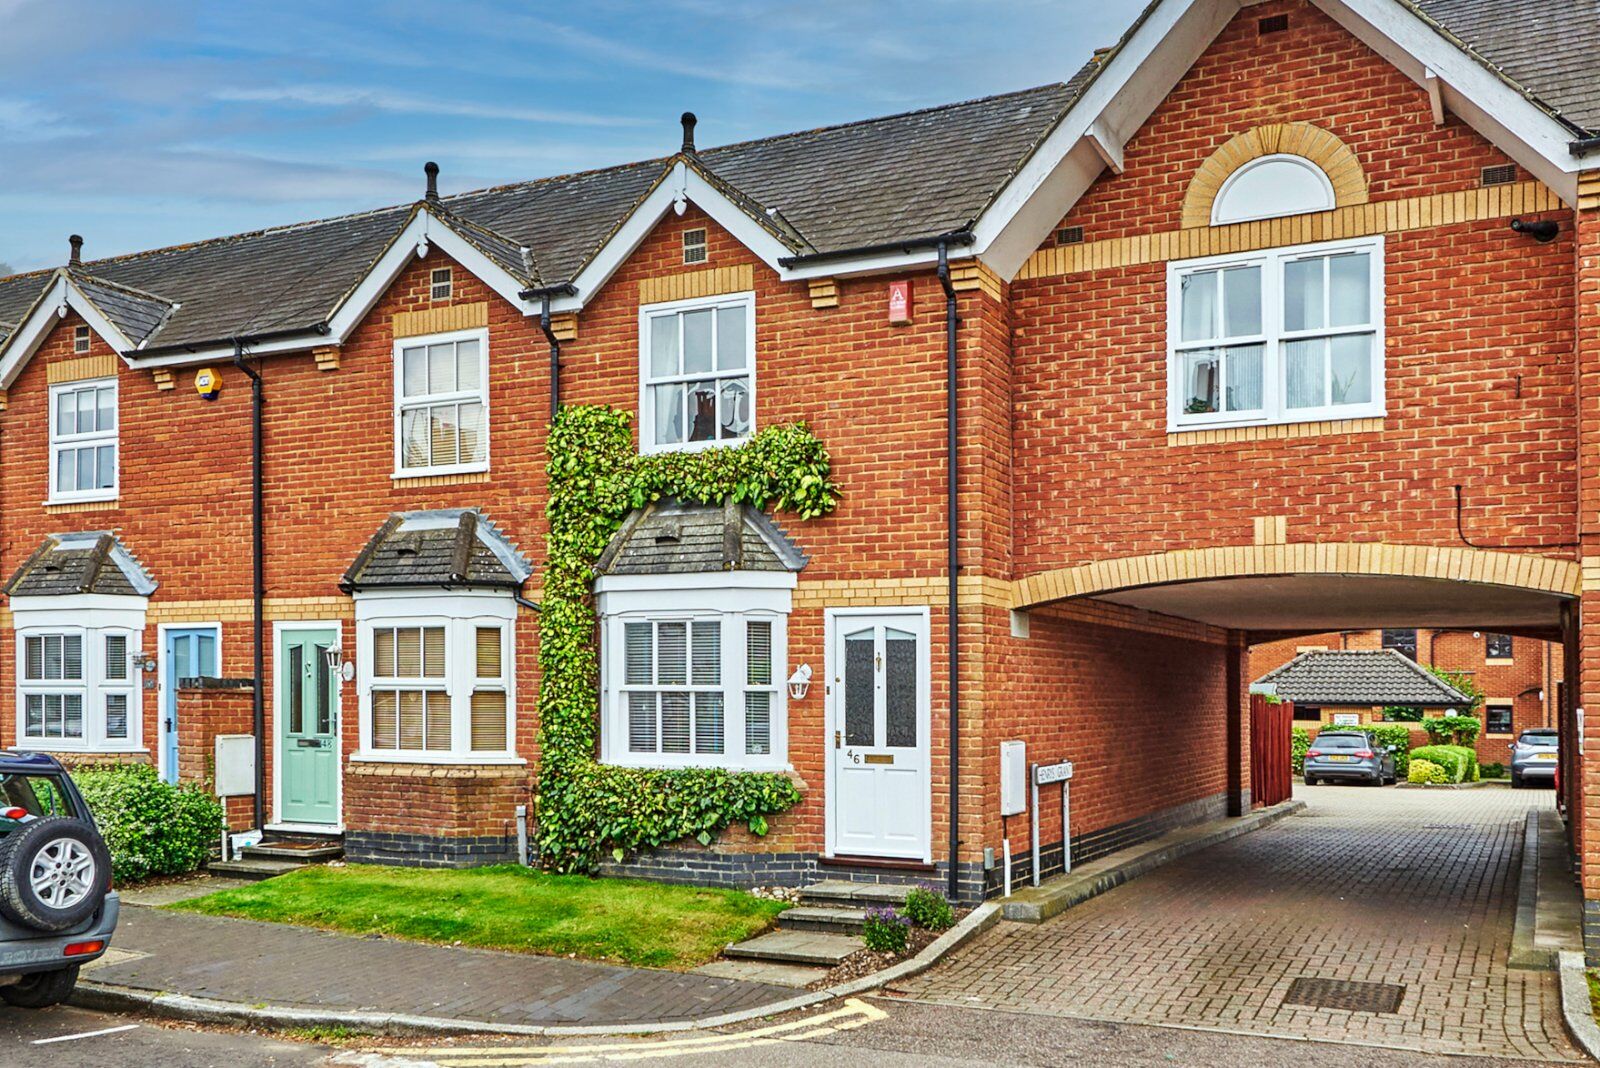 2 bedroom mid terraced house for sale Old London Road, St. Albans, AL1, main image